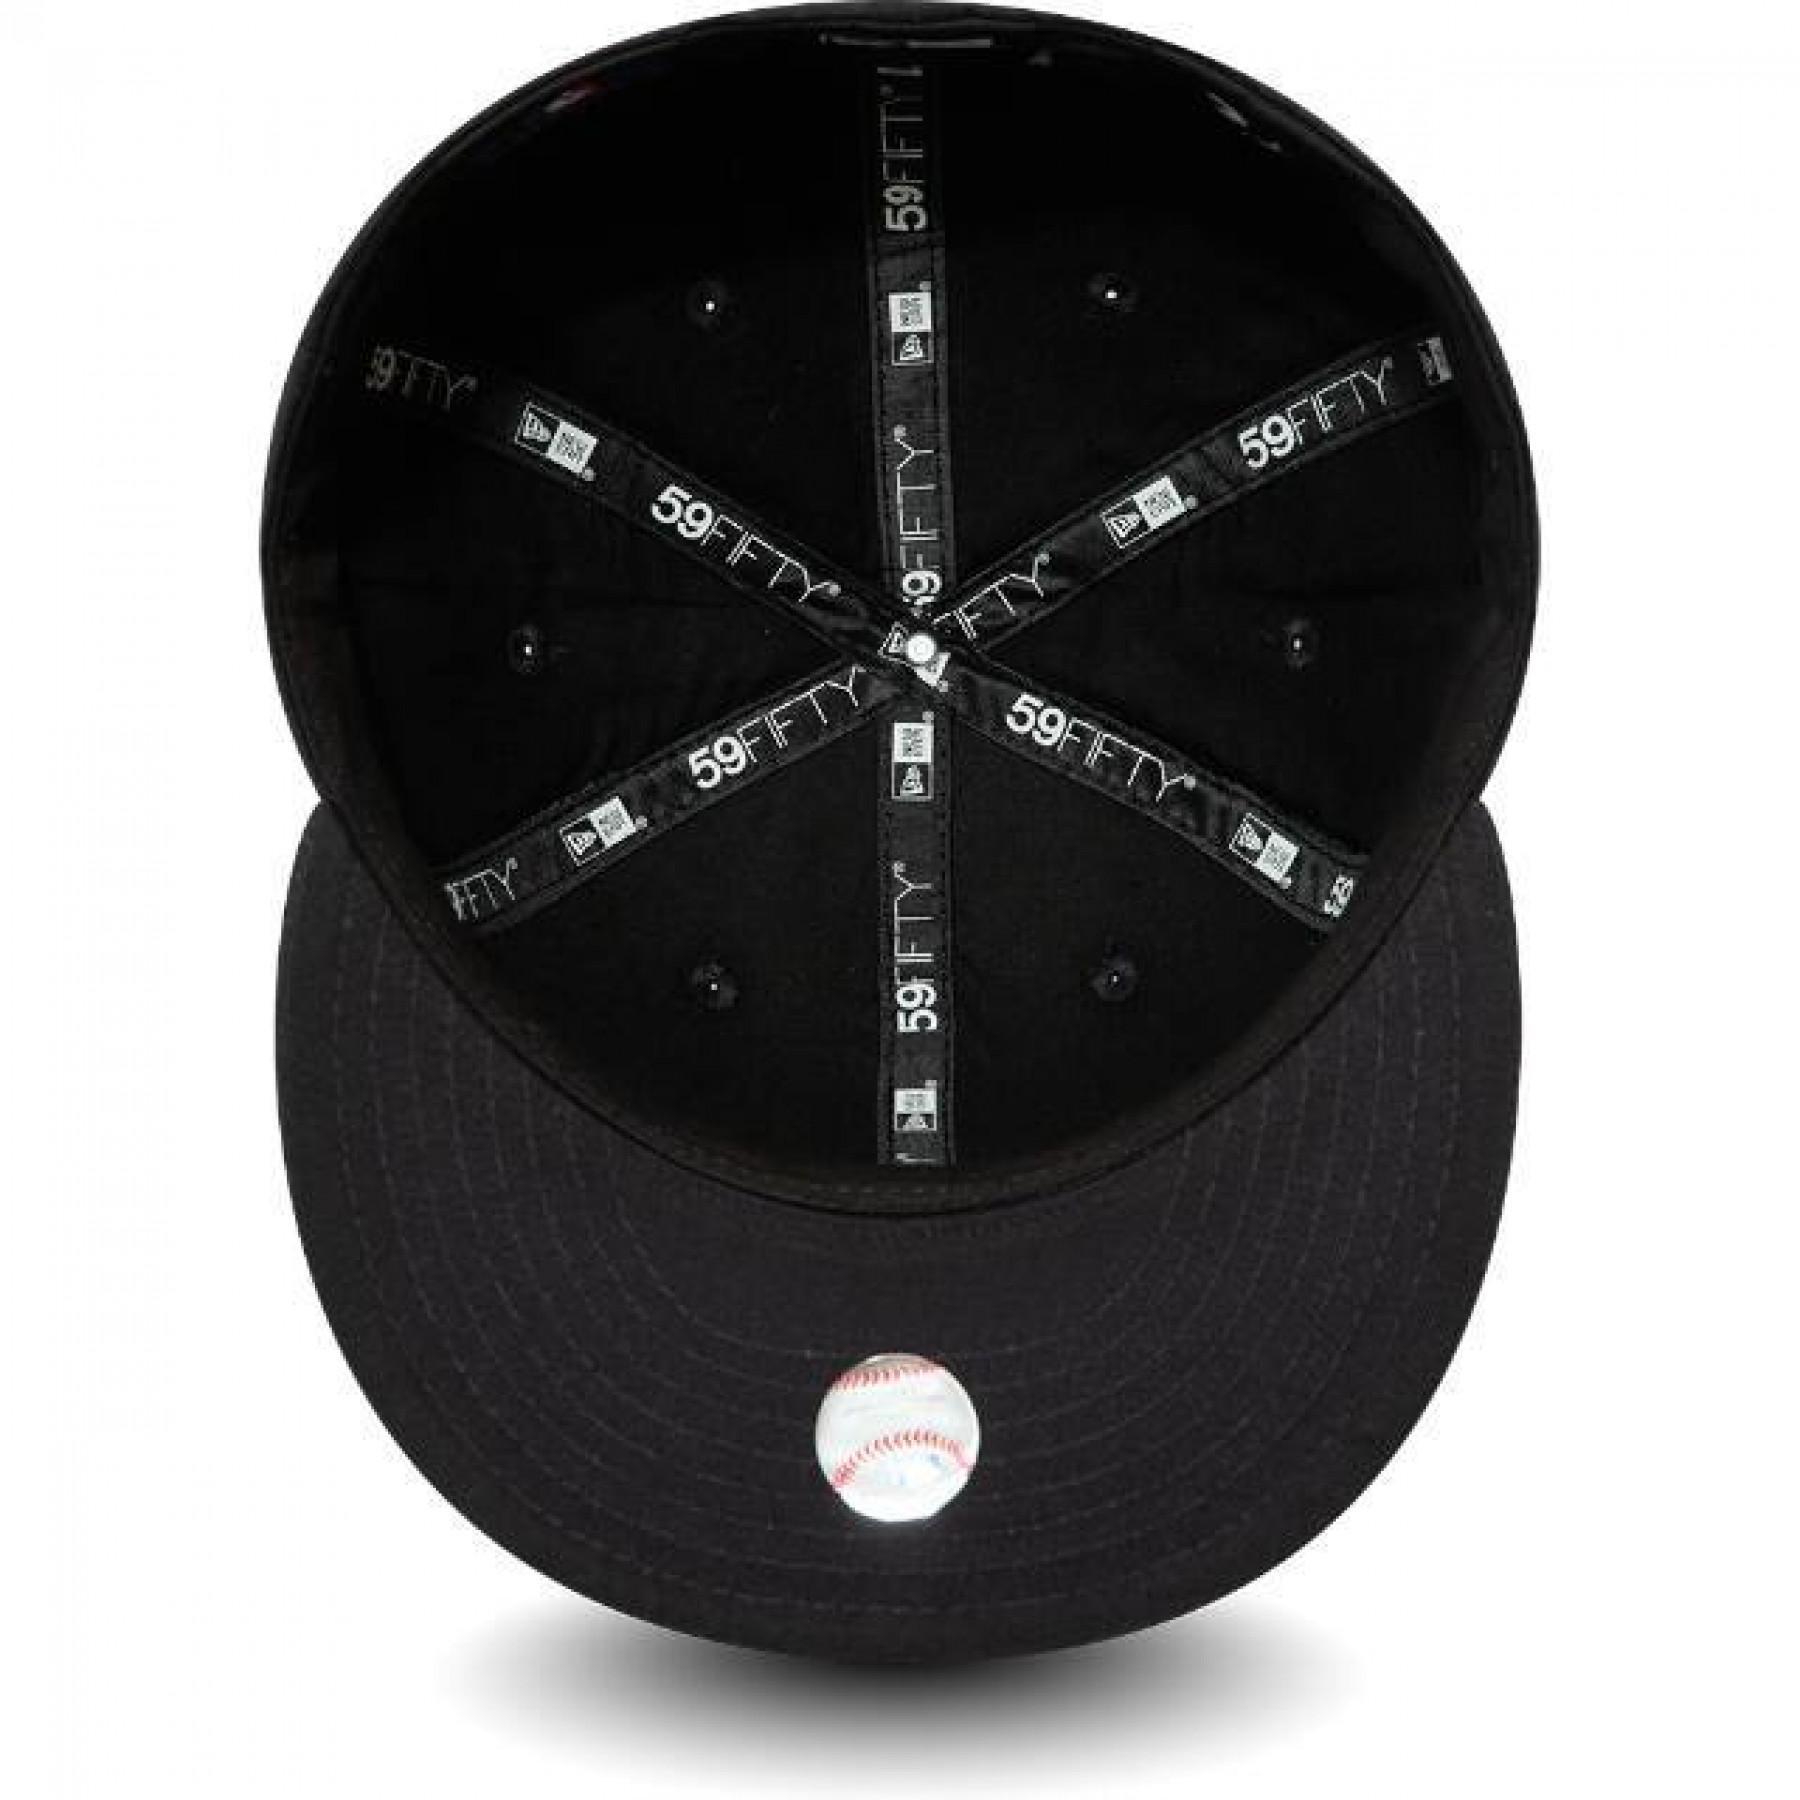 Casquette New Era MLB Utility 59fifty New York Yankees